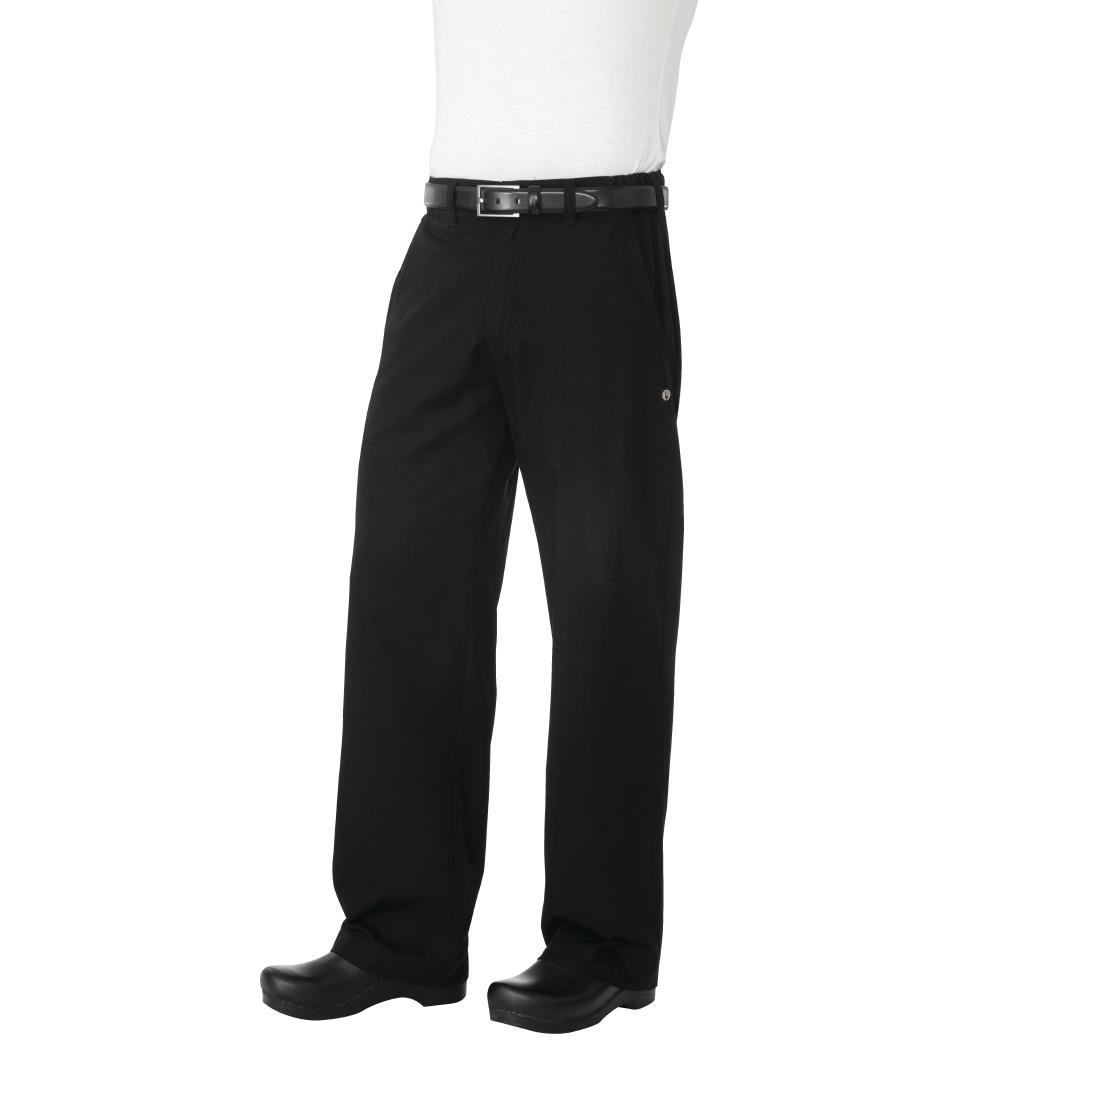 Chef Works Unisex Professional Series Chefs Trousers Black Herringbone S - A674-S  - 1